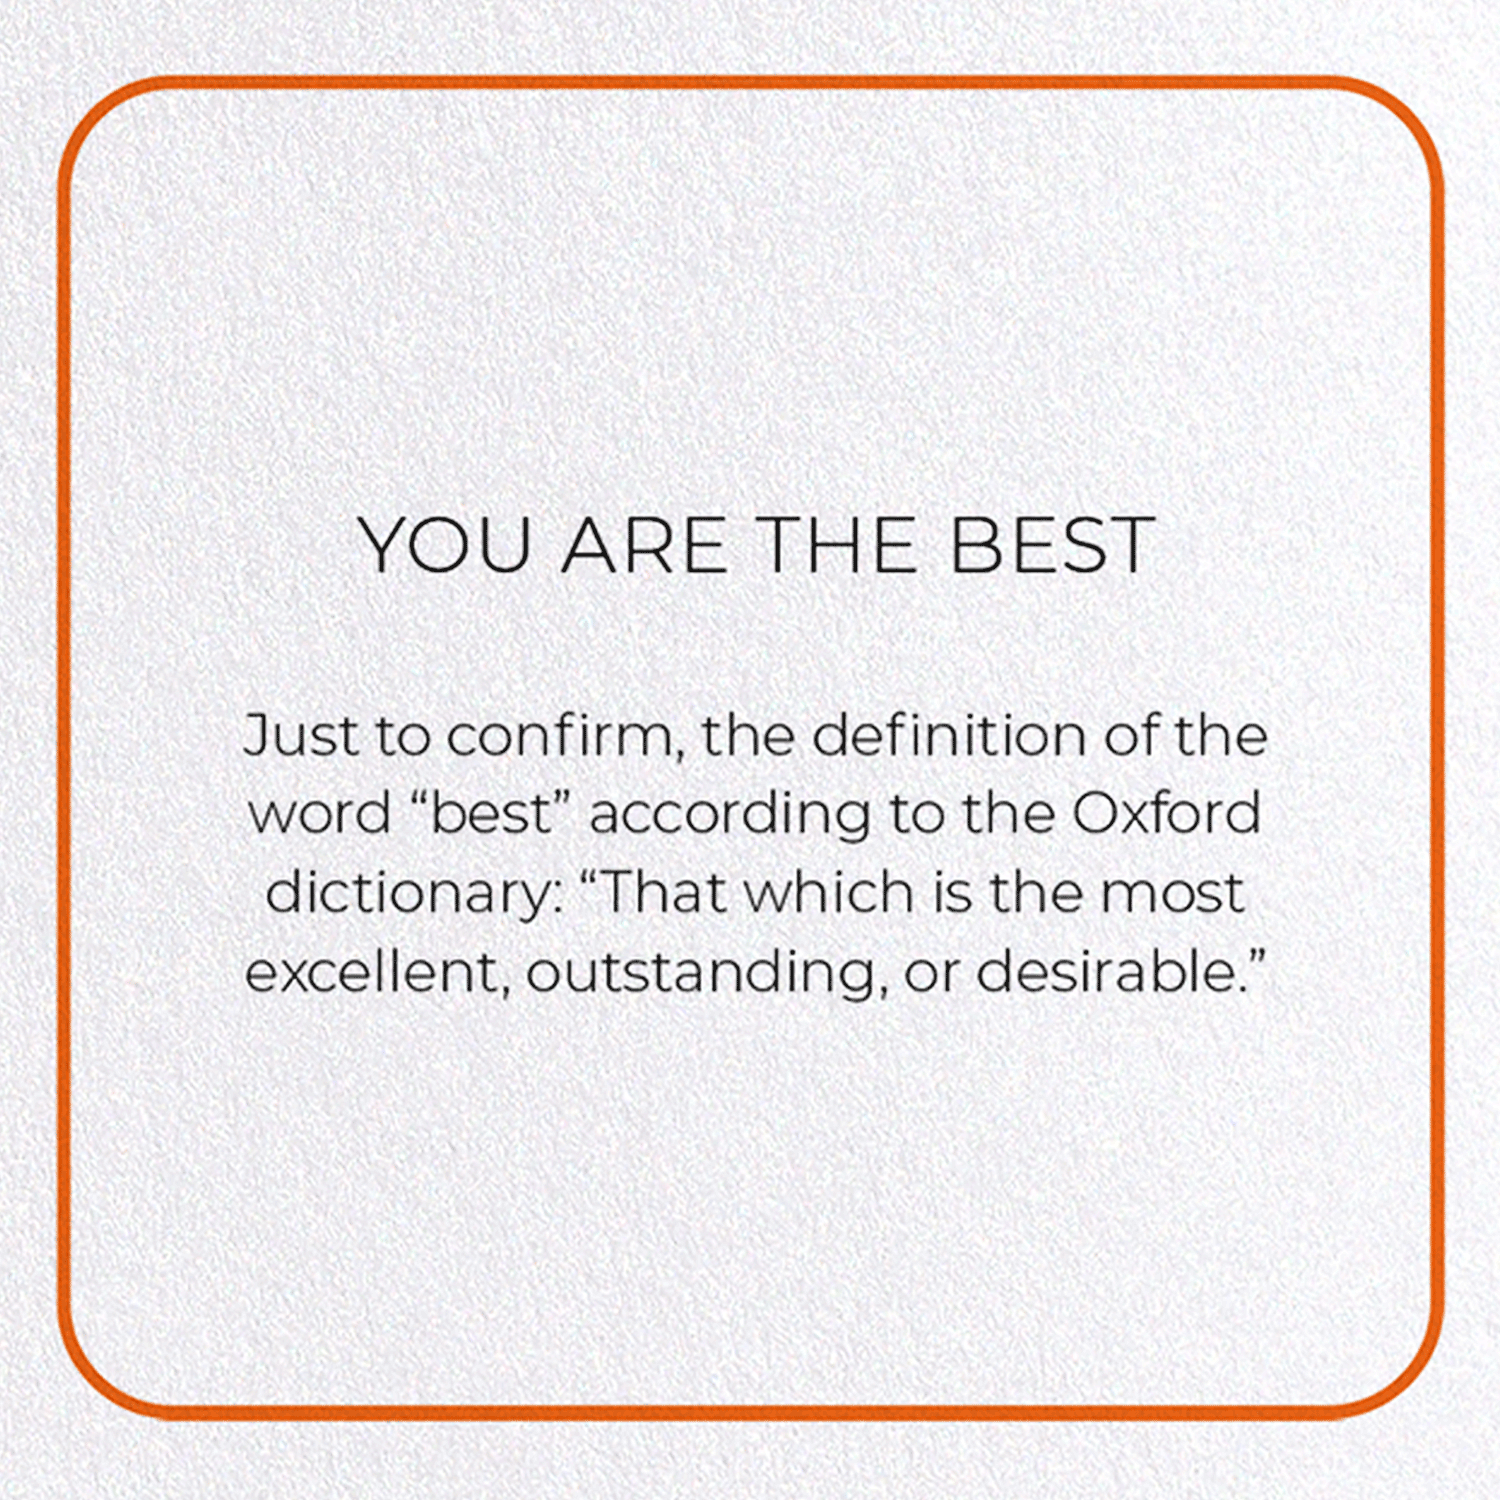 YOU ARE THE BEST: Photo Greeting Card